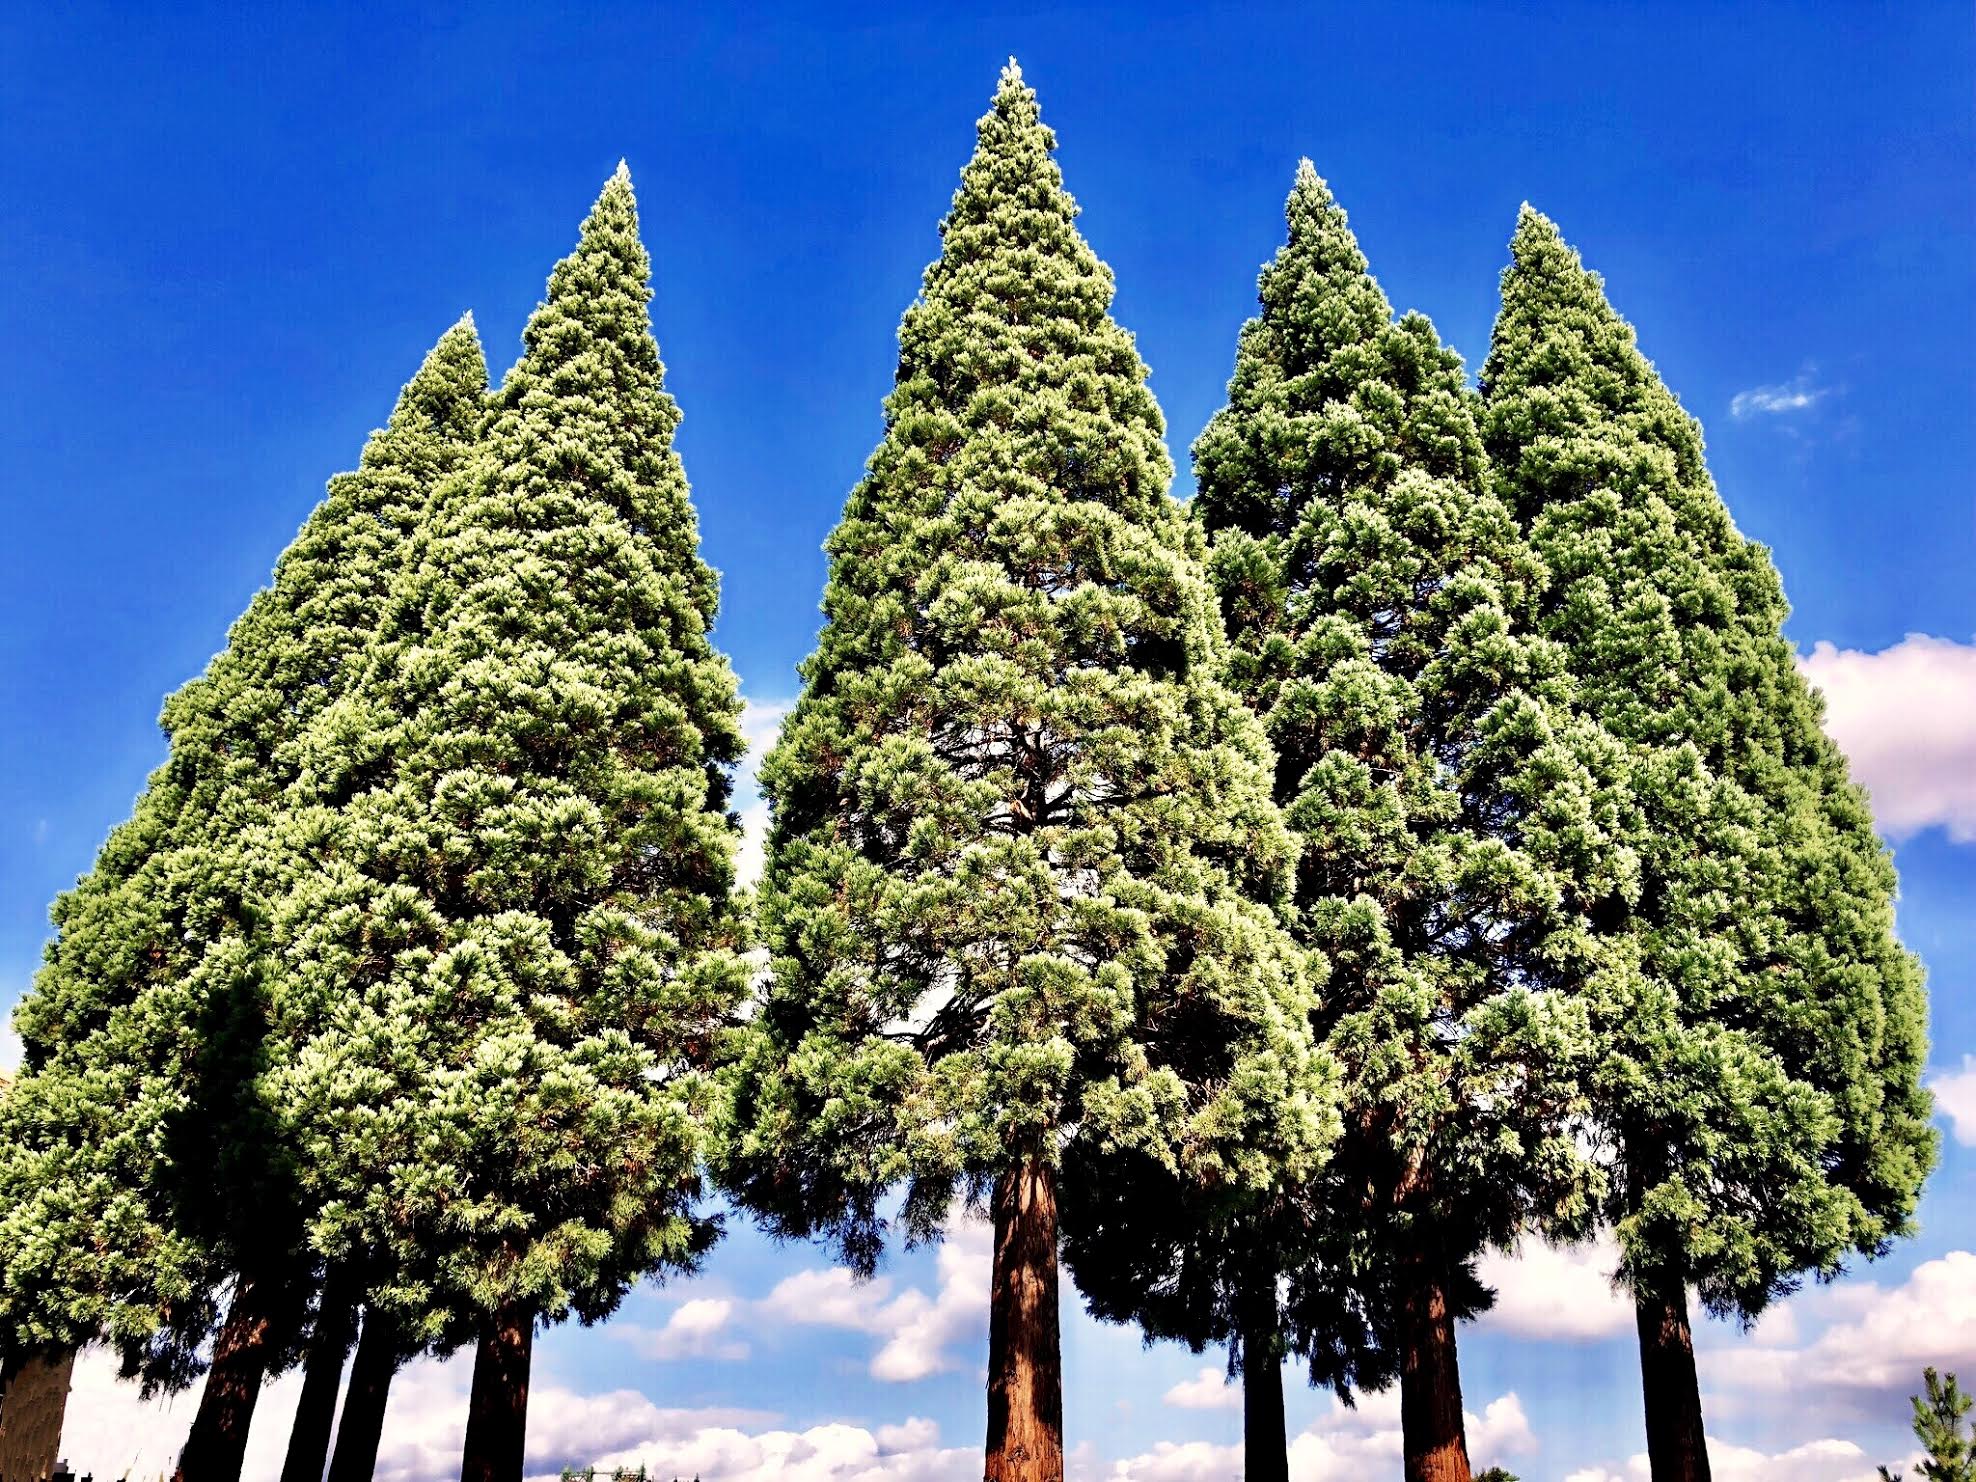 Several large conifer trees stand in the Pacific Northwest, near the WRMC conference